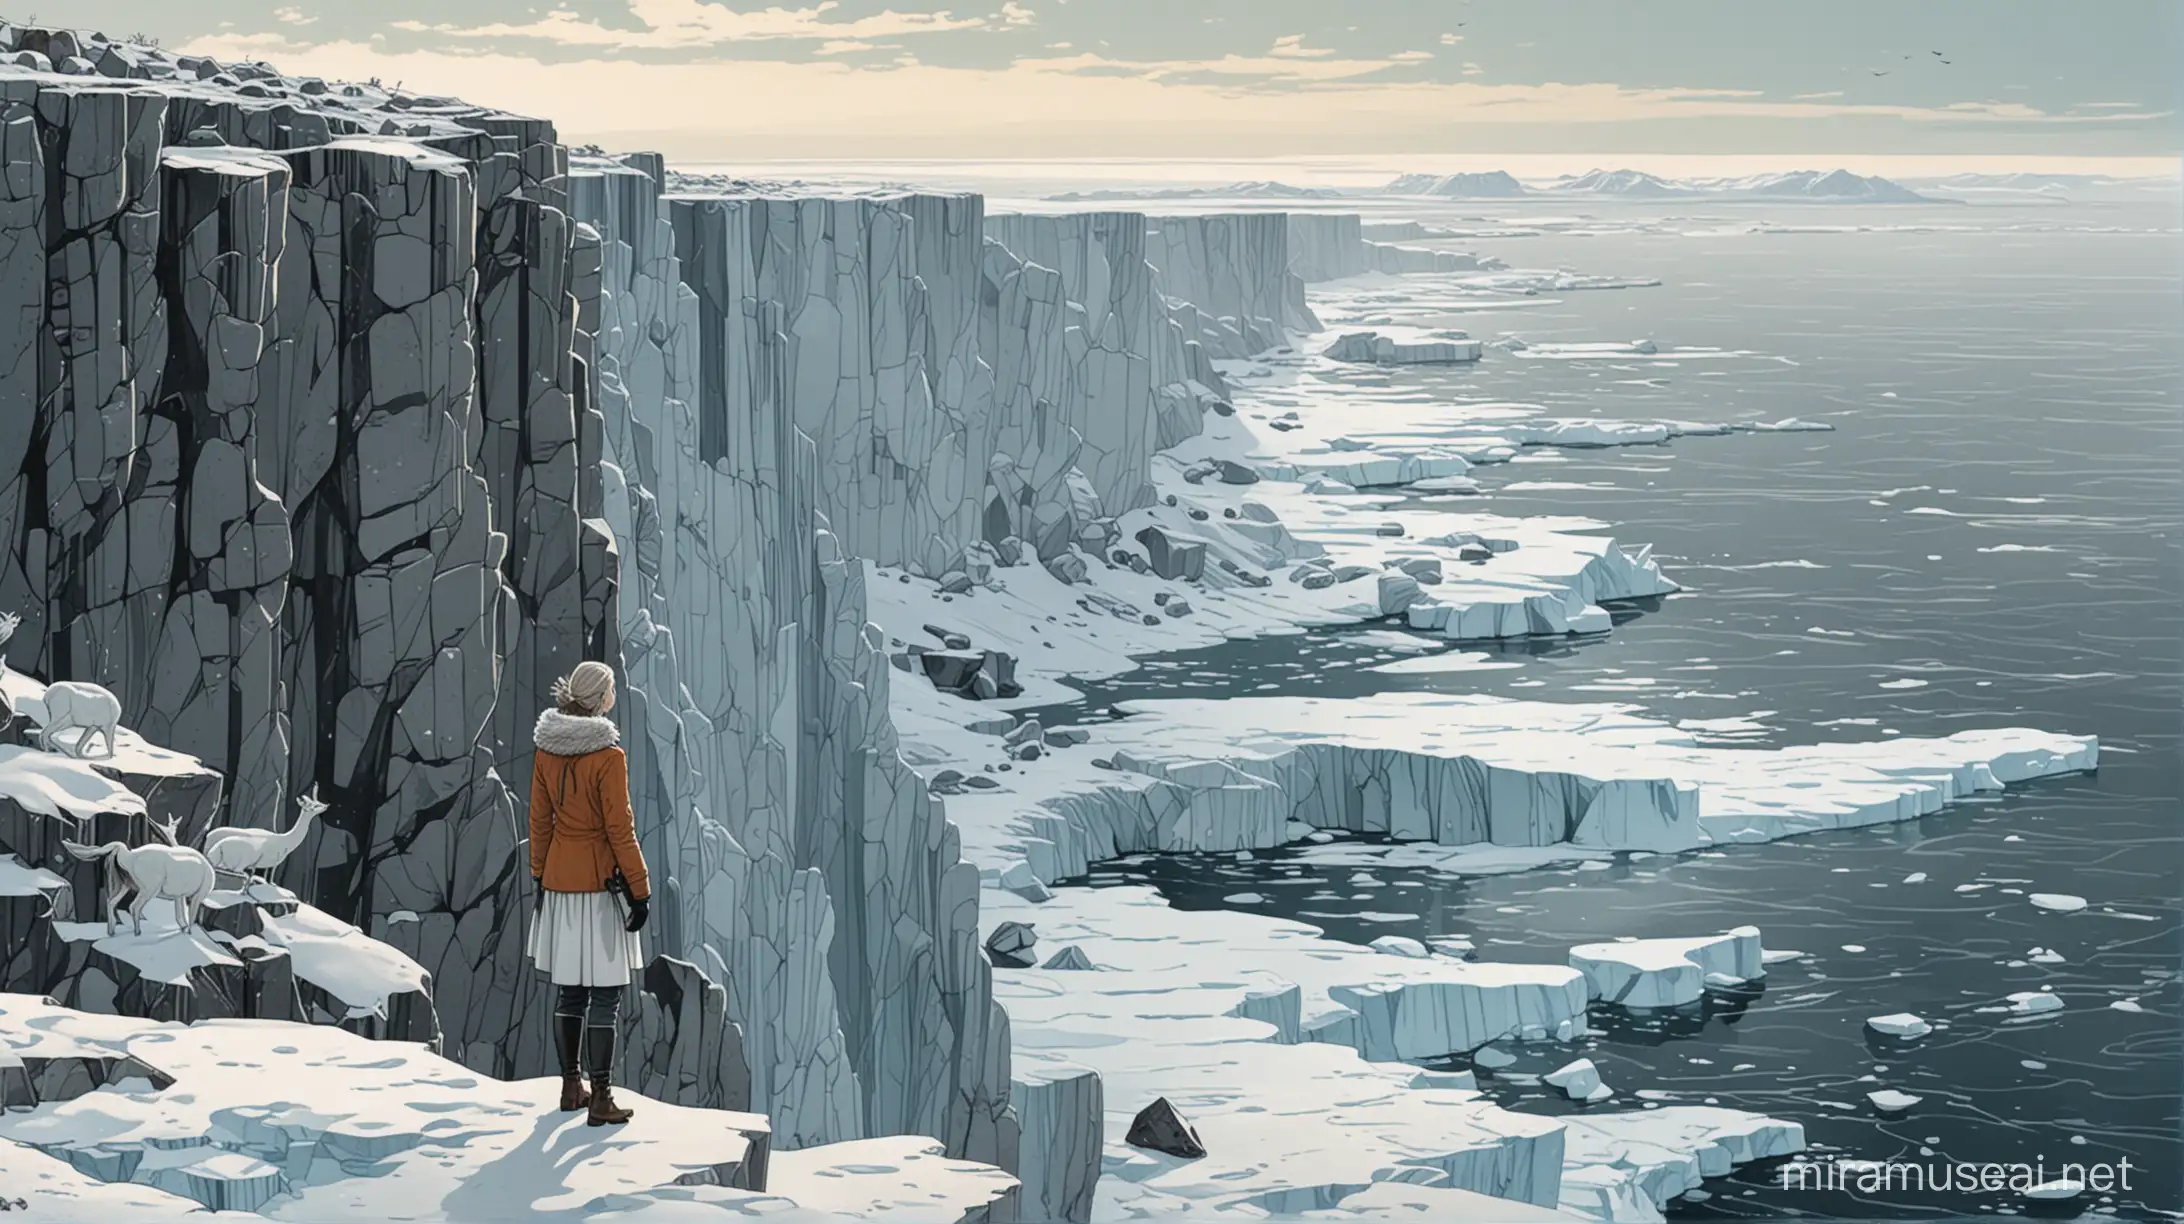 Simona Tabasco, in the style of a French graphic novel, stands on the edge of an icy cliff overlooking the Arctic Ocean, surrounded by white deer